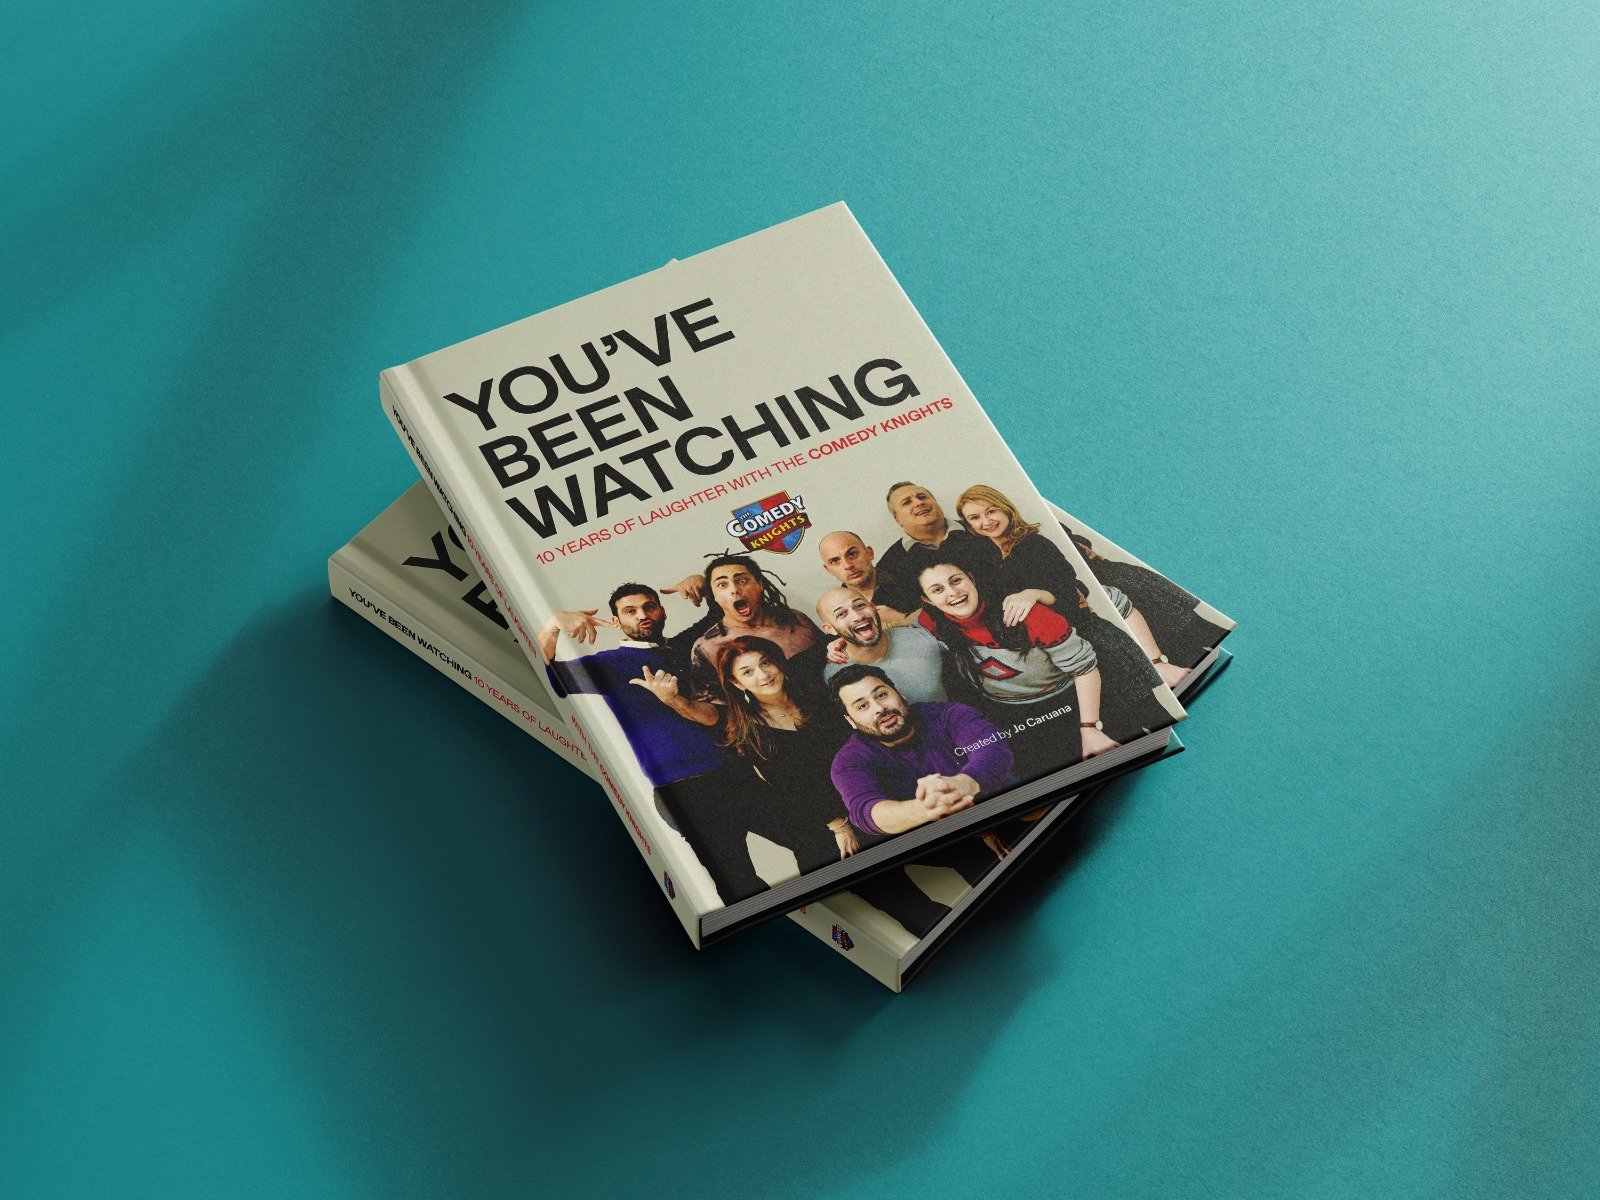 Comedy Knights New Coffee table book - You've been watching ... 10 years of laughter with the comedy knights malta, The Comedy Knights Celebrate (Almost) 10 Years of Laughter with New Book malta, Comedy knights malta